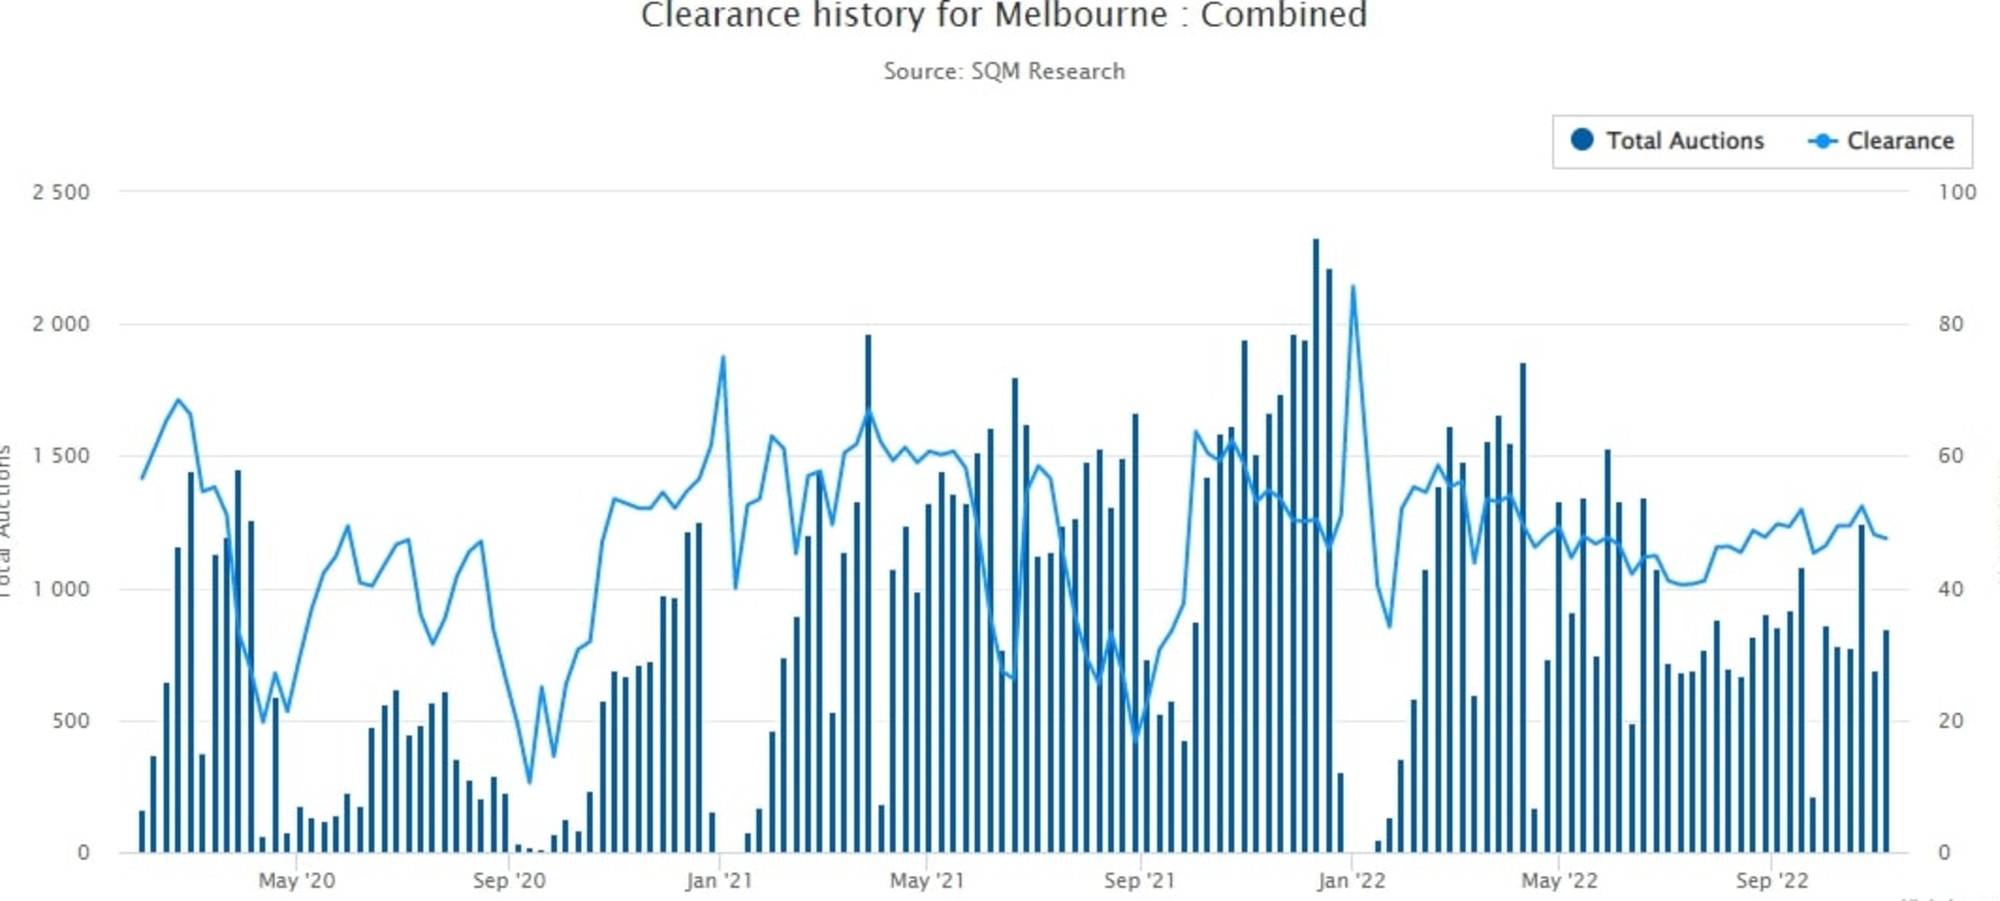 The clearance auction results for Melbourne.